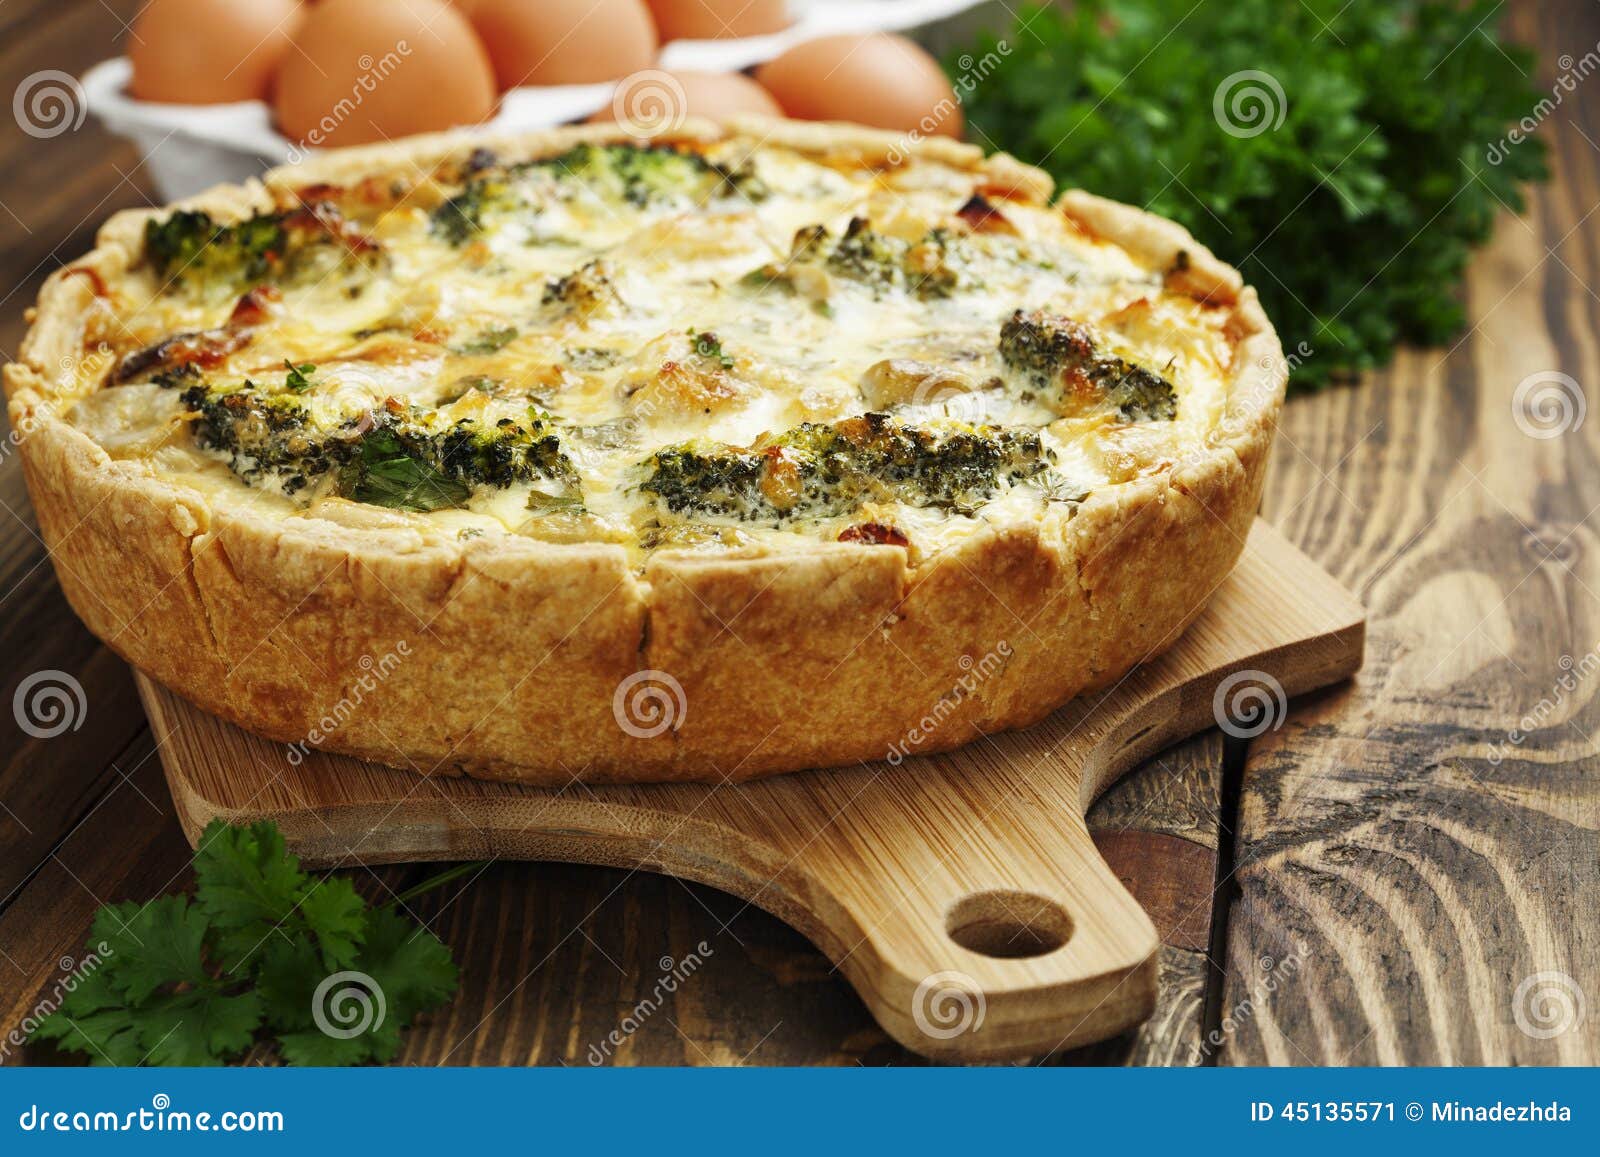 Quiche Lorraine with Chicken, Mushrooms and Broccoli Stock Image ...